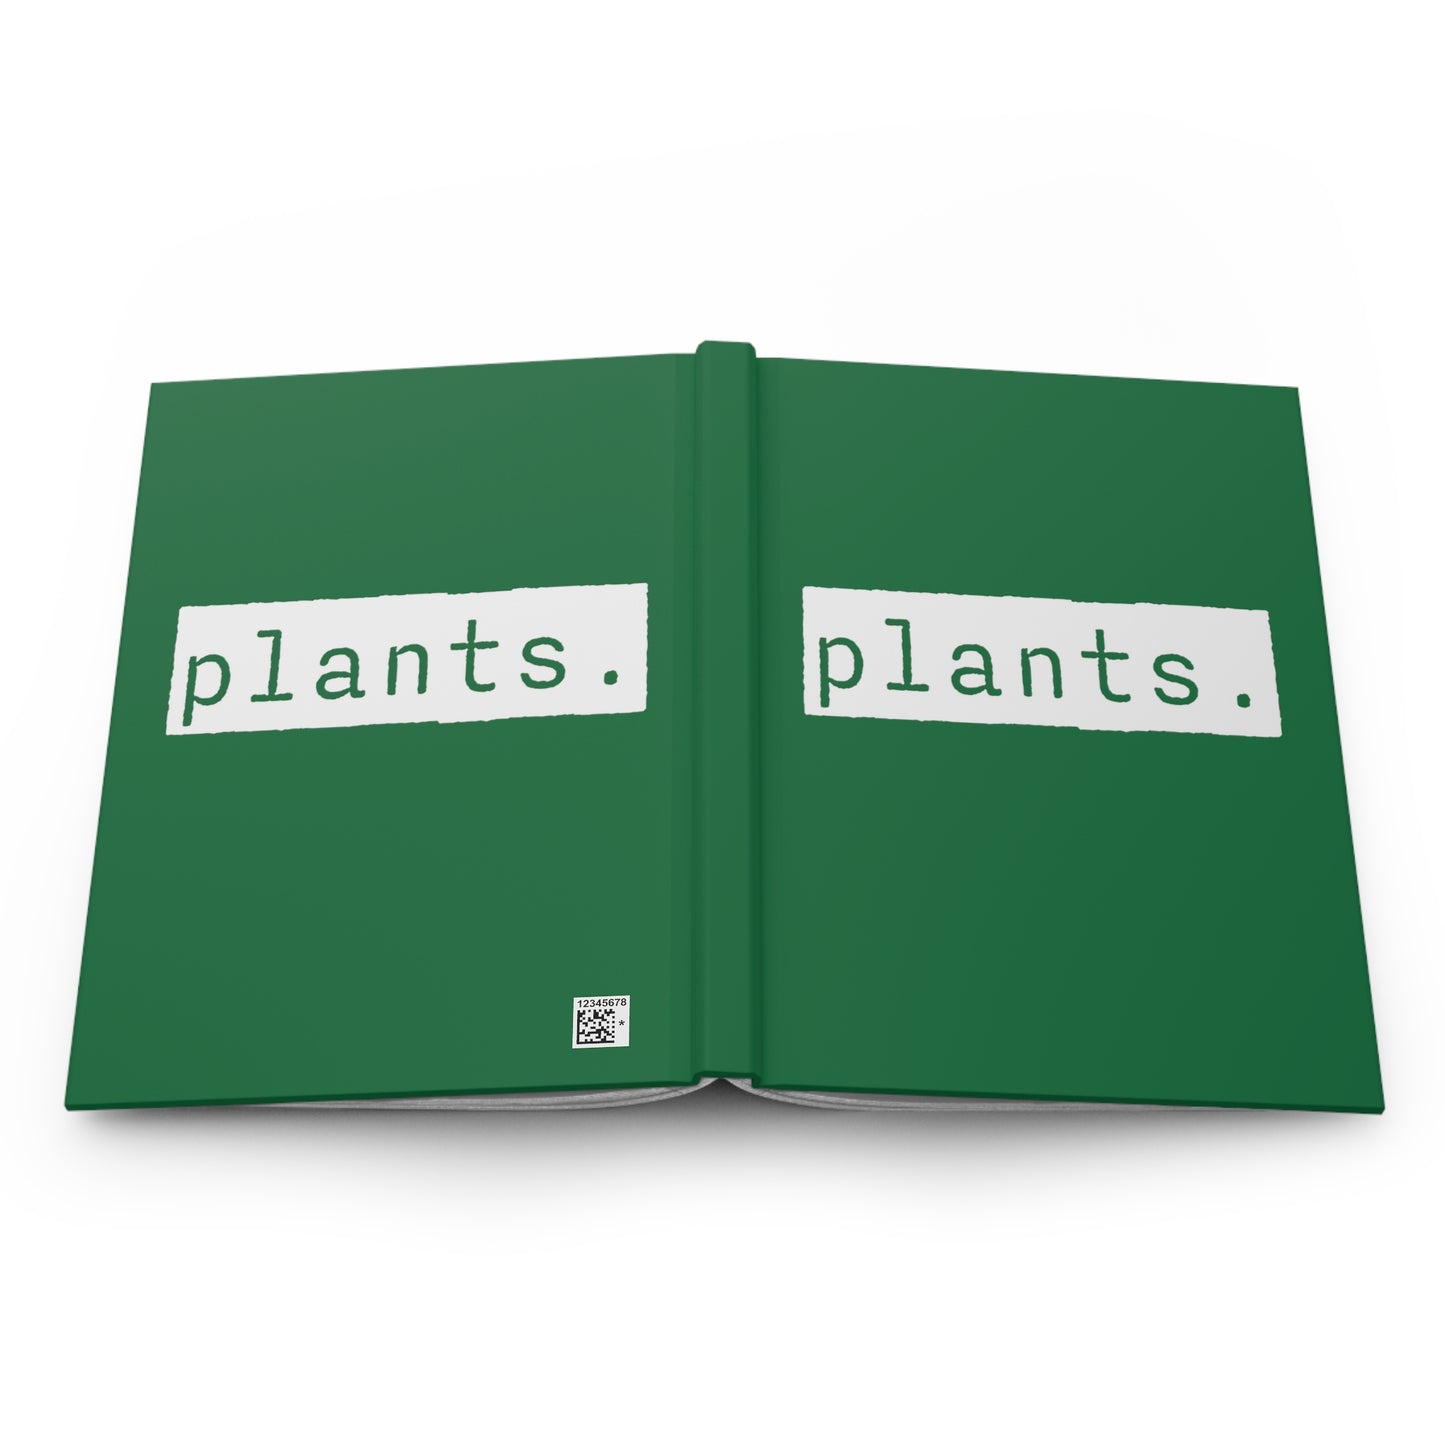 Plants Green Matte Hardcover Journal | Blank Book for Ideas and Planning | Lined Notebook Diary Plant Log